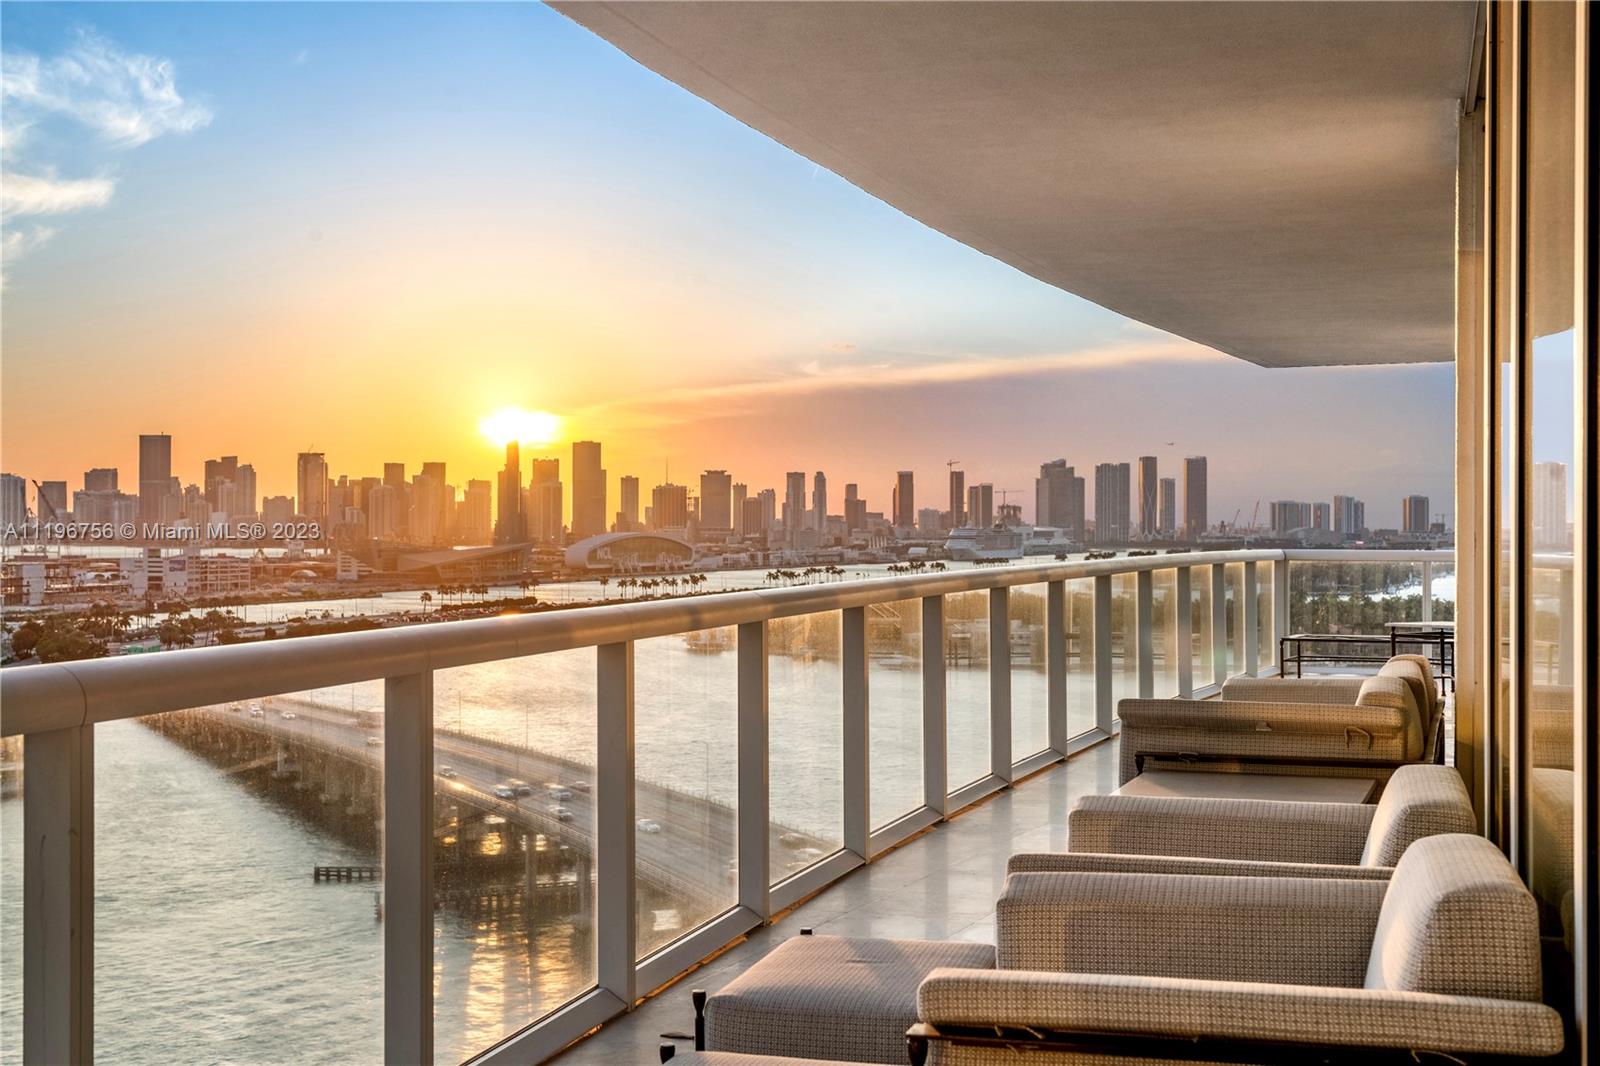 Turnkey one-of-a-kind 5 bed/ 4 bath masterpiece at Icon South Beach located in the prestigious South of Fifth enclave boasts over 4,300 SF of interior living and 1,172 SF of outdoor living. Enjoy spectacular panoramas and sunsets from your wraparound terraces with premium SW exposures, from Biscayne Bay,  Miami skyline, to Fisher Island and the Atlantic Ocean. Completely reconstructed with custom lighting, wood flooring, Macauba Blue quartzite, thasos marble mosaics and more. Dreamy glass corner primary suite features bay spa bath retreat, his/hers WI. Chef's kitchen features Sub Zero, Miele espresso machine/ovens and Wolf range. Amenities bi-level pool deck, cafe, spa, fitness club, concierge & 24hr valet/security. Welcome to the best SoFi offers steps marina, beach park +top restaurants.